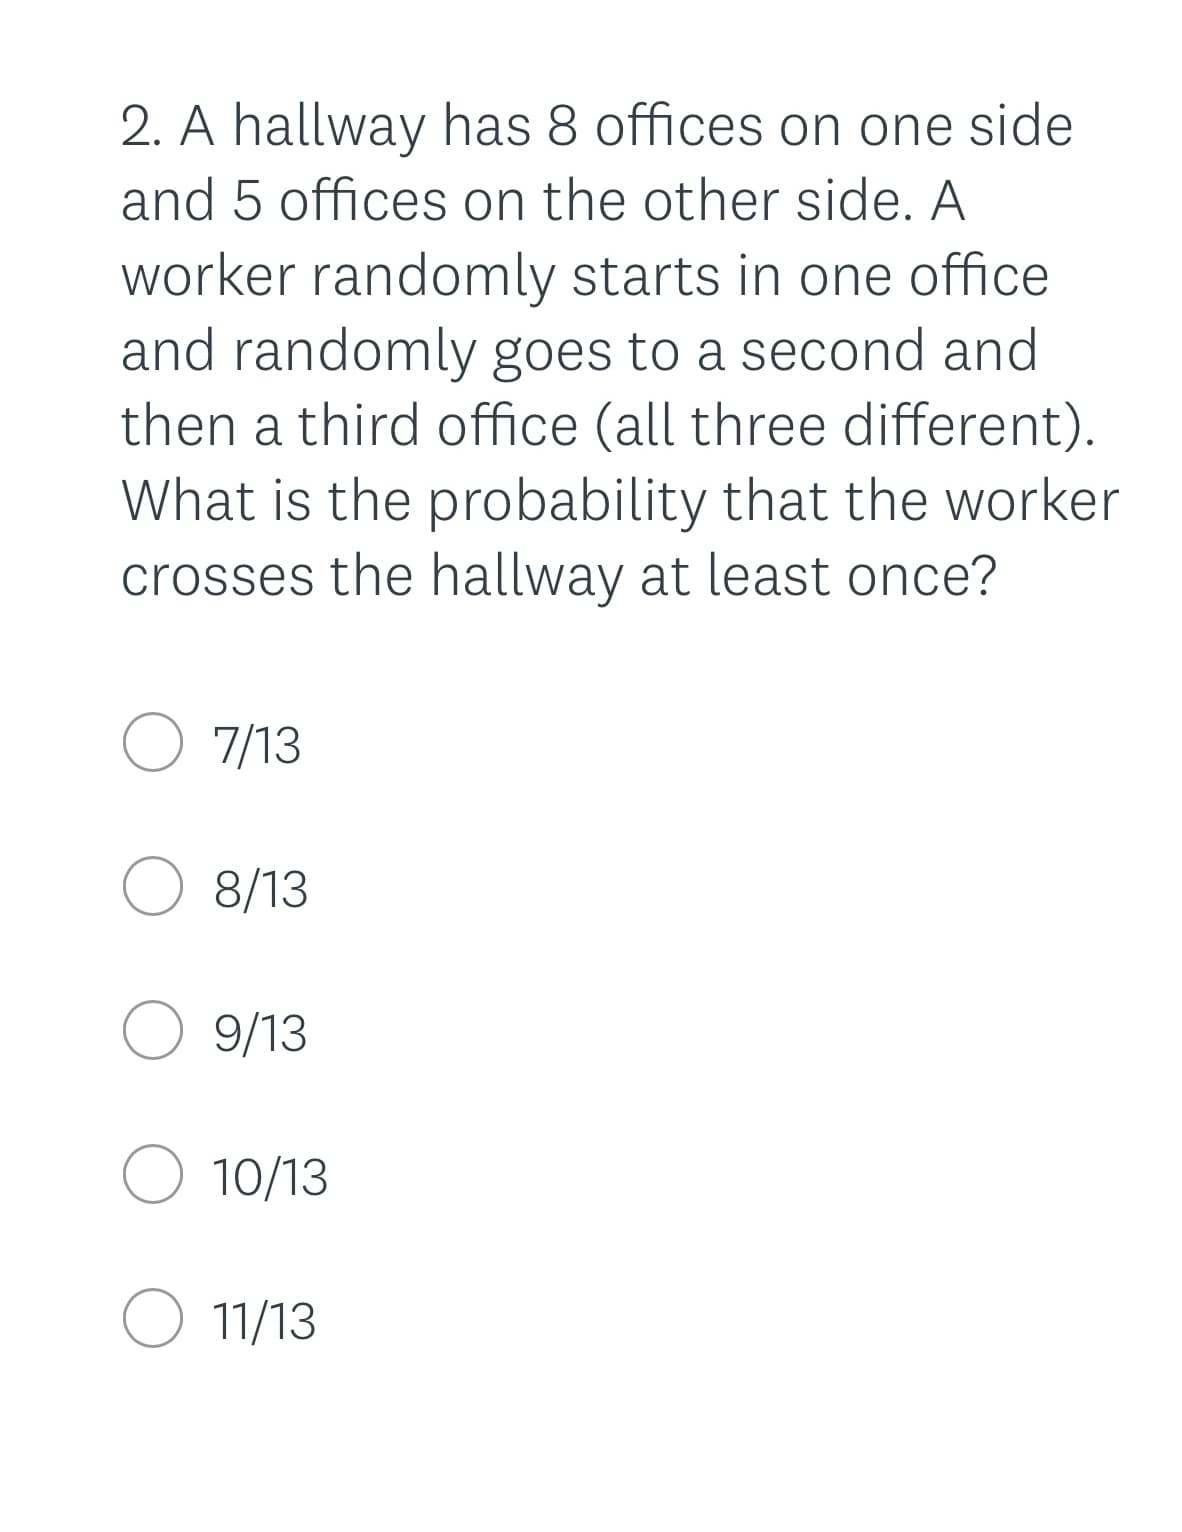 2. A hallway has 8 offices on one side
and 5 offices on the other side. A
worker randomly starts in one office
and randomly goes to a second and
then a third office (all three different).
What is the probability that the worker
crosses the hallway at least once?
O 7/13
O 8/13
O 9/13
O 10/13
O 11/13
